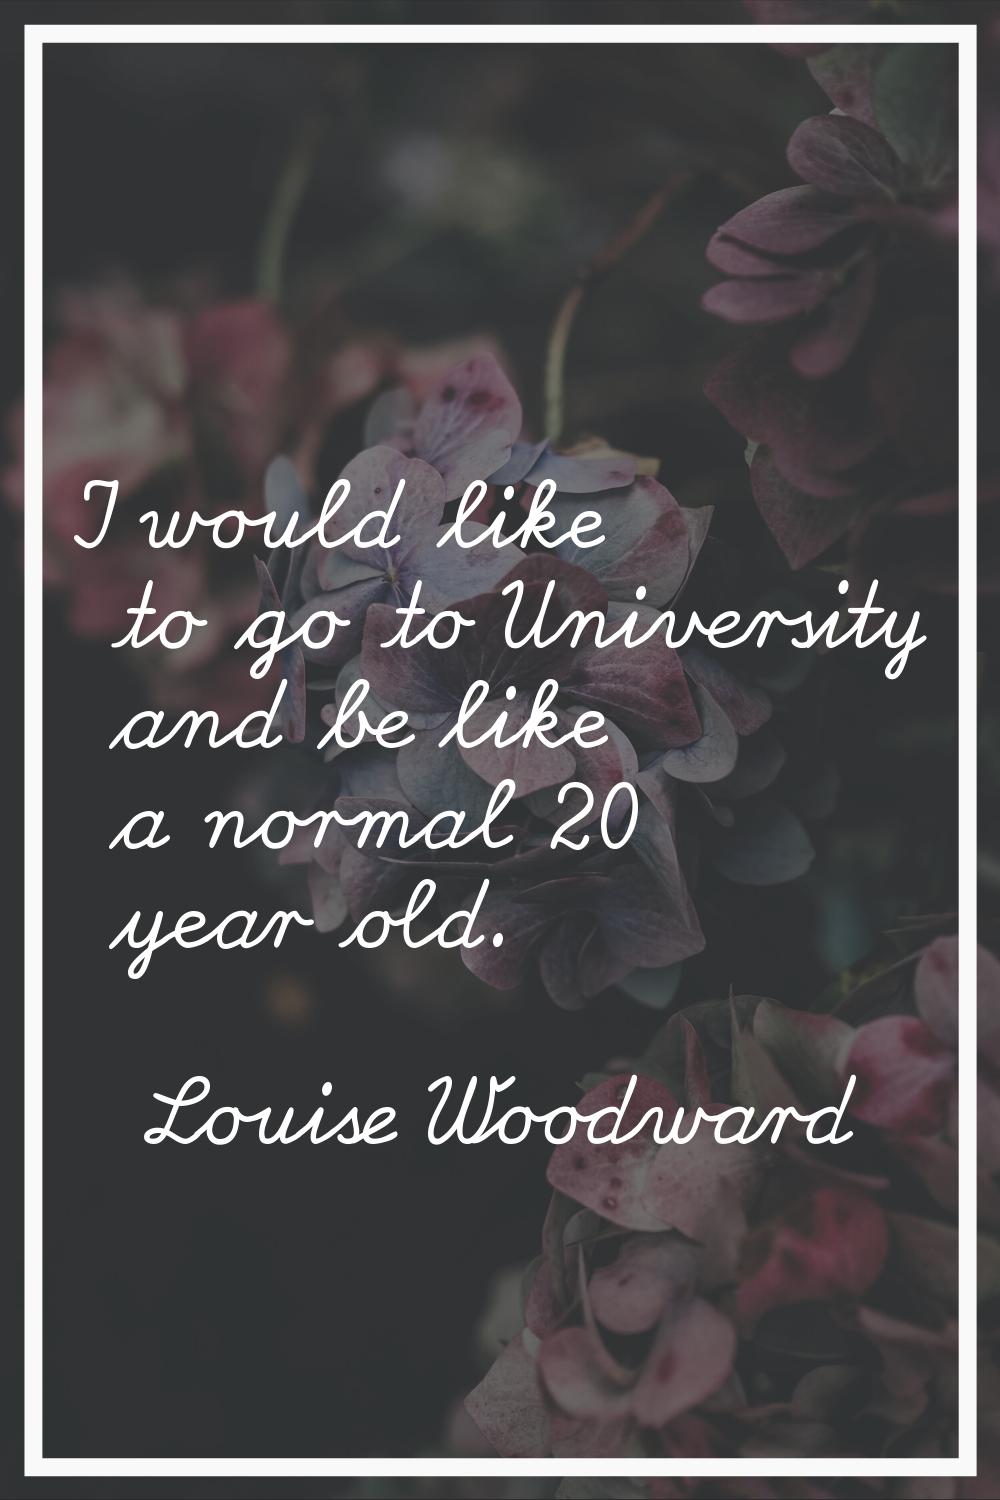 I would like to go to University and be like a normal 20 year old.